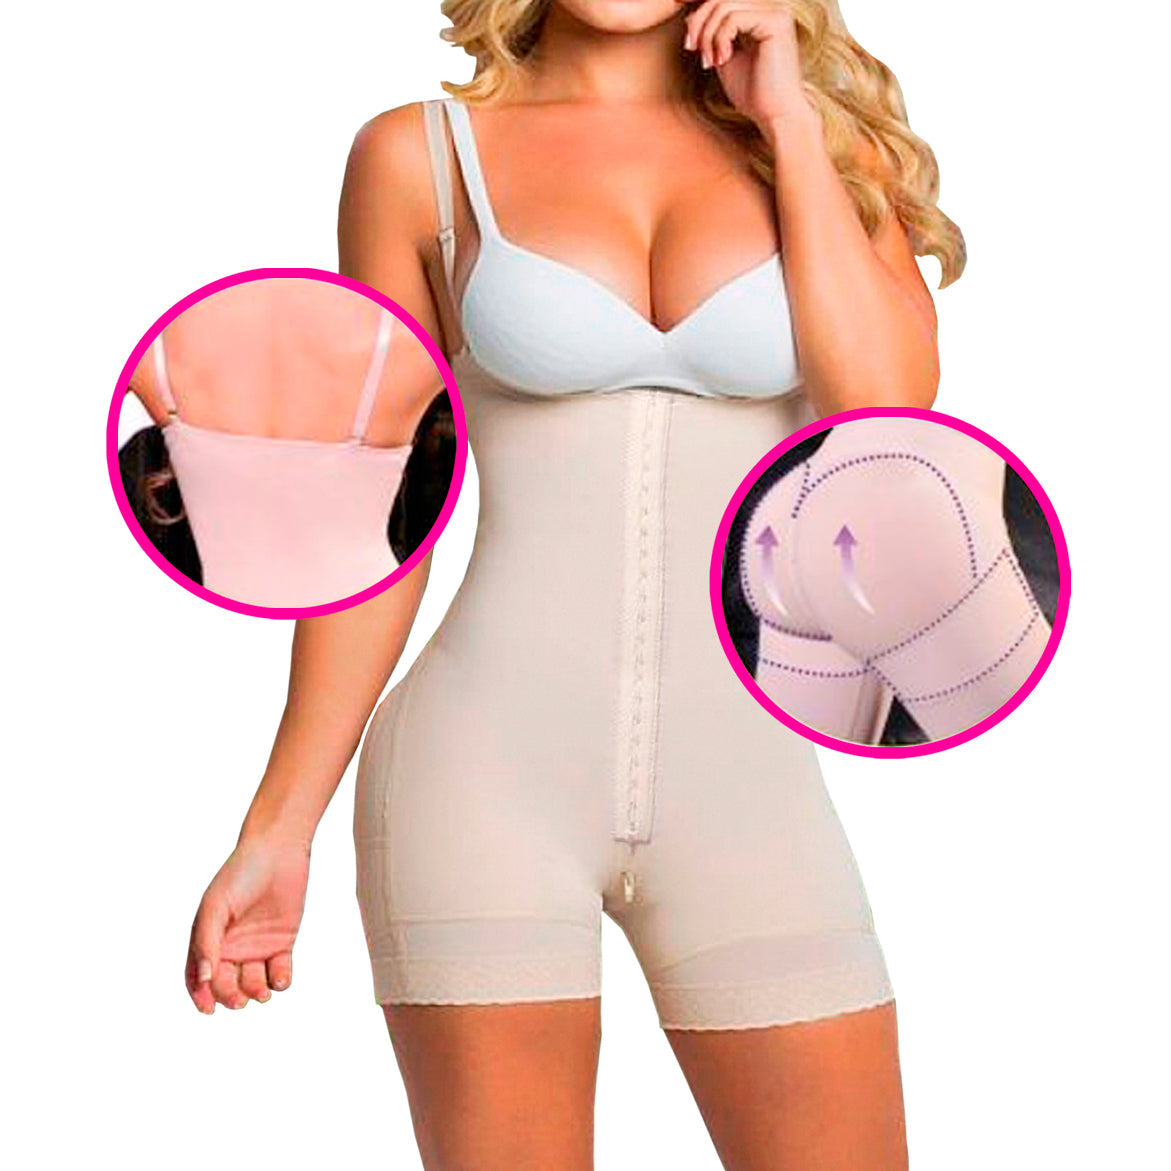 NutiFit Fajas Colombiana Shapewear for Women Tummy Control Body Shaper with Short and Central Hooks